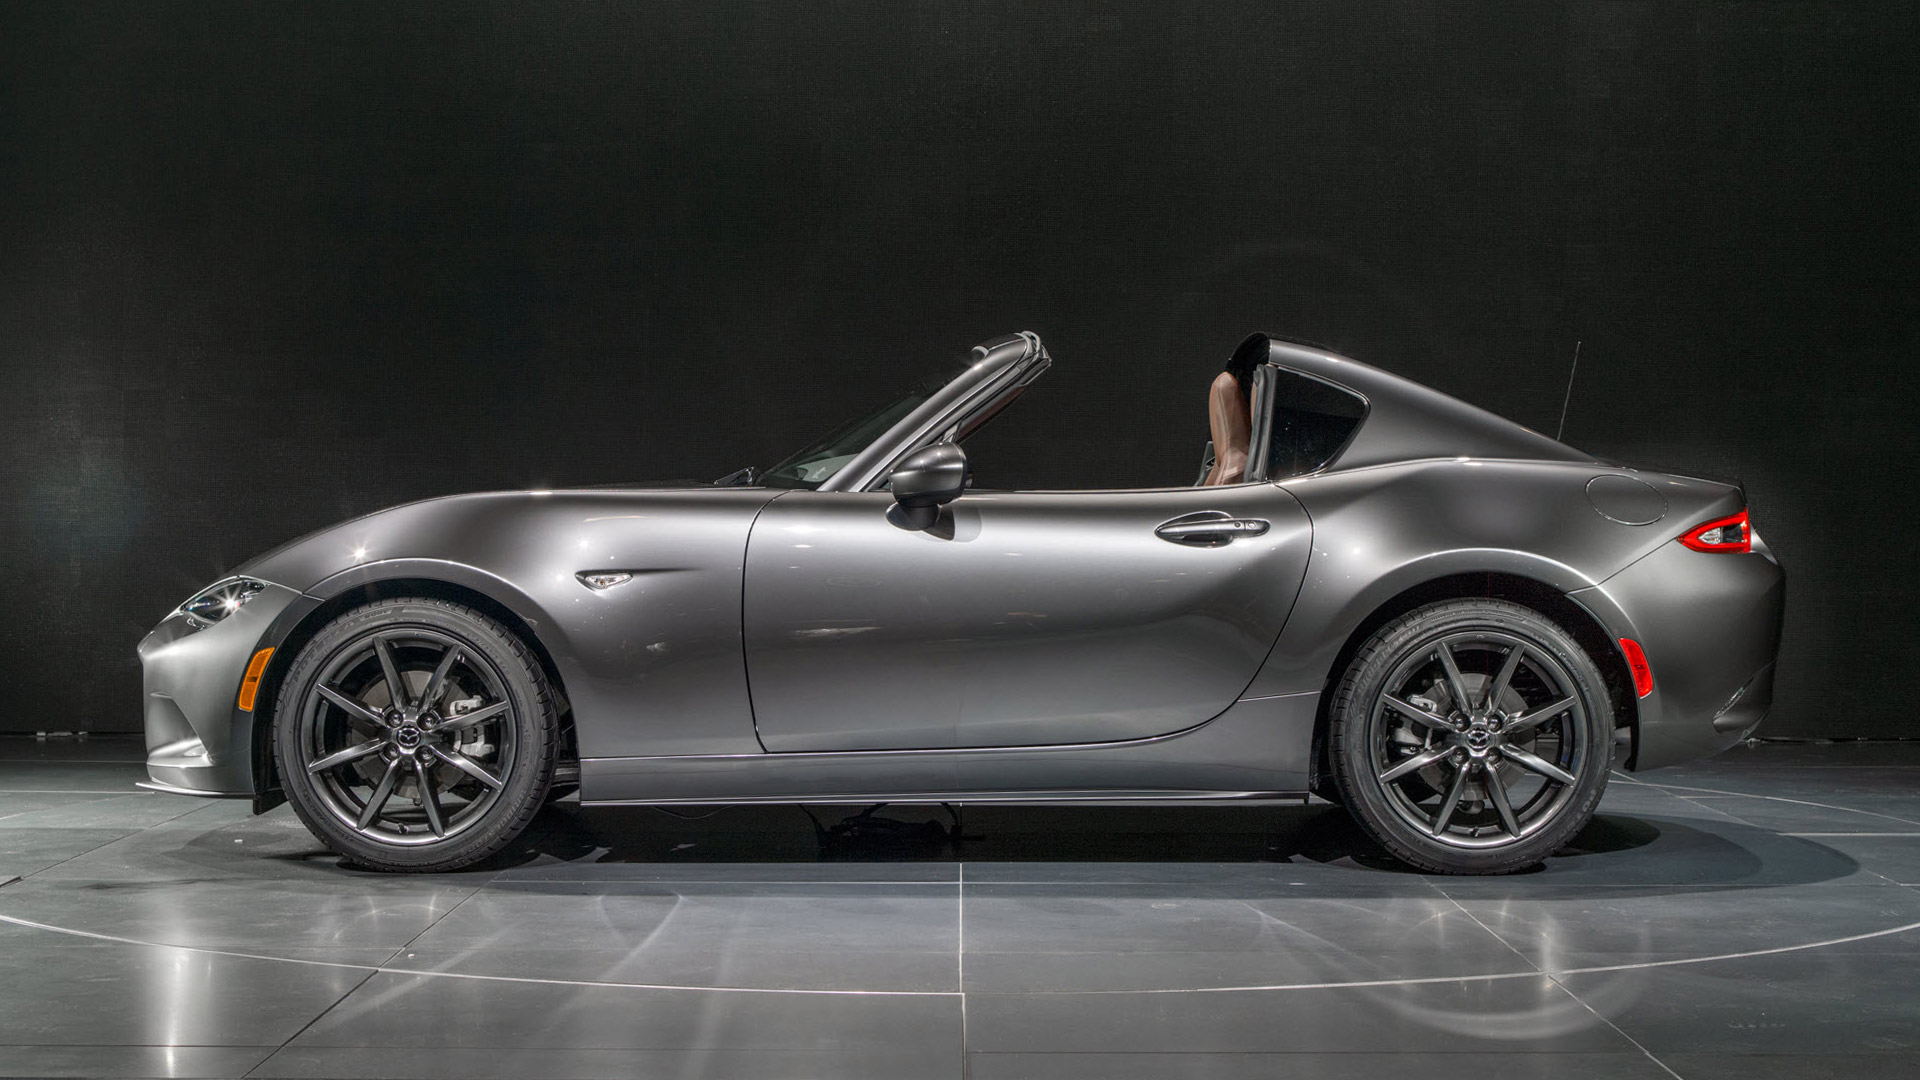 2017 Mazda MX-5 Miata RF Review: Great, But There’s Room for Improvement